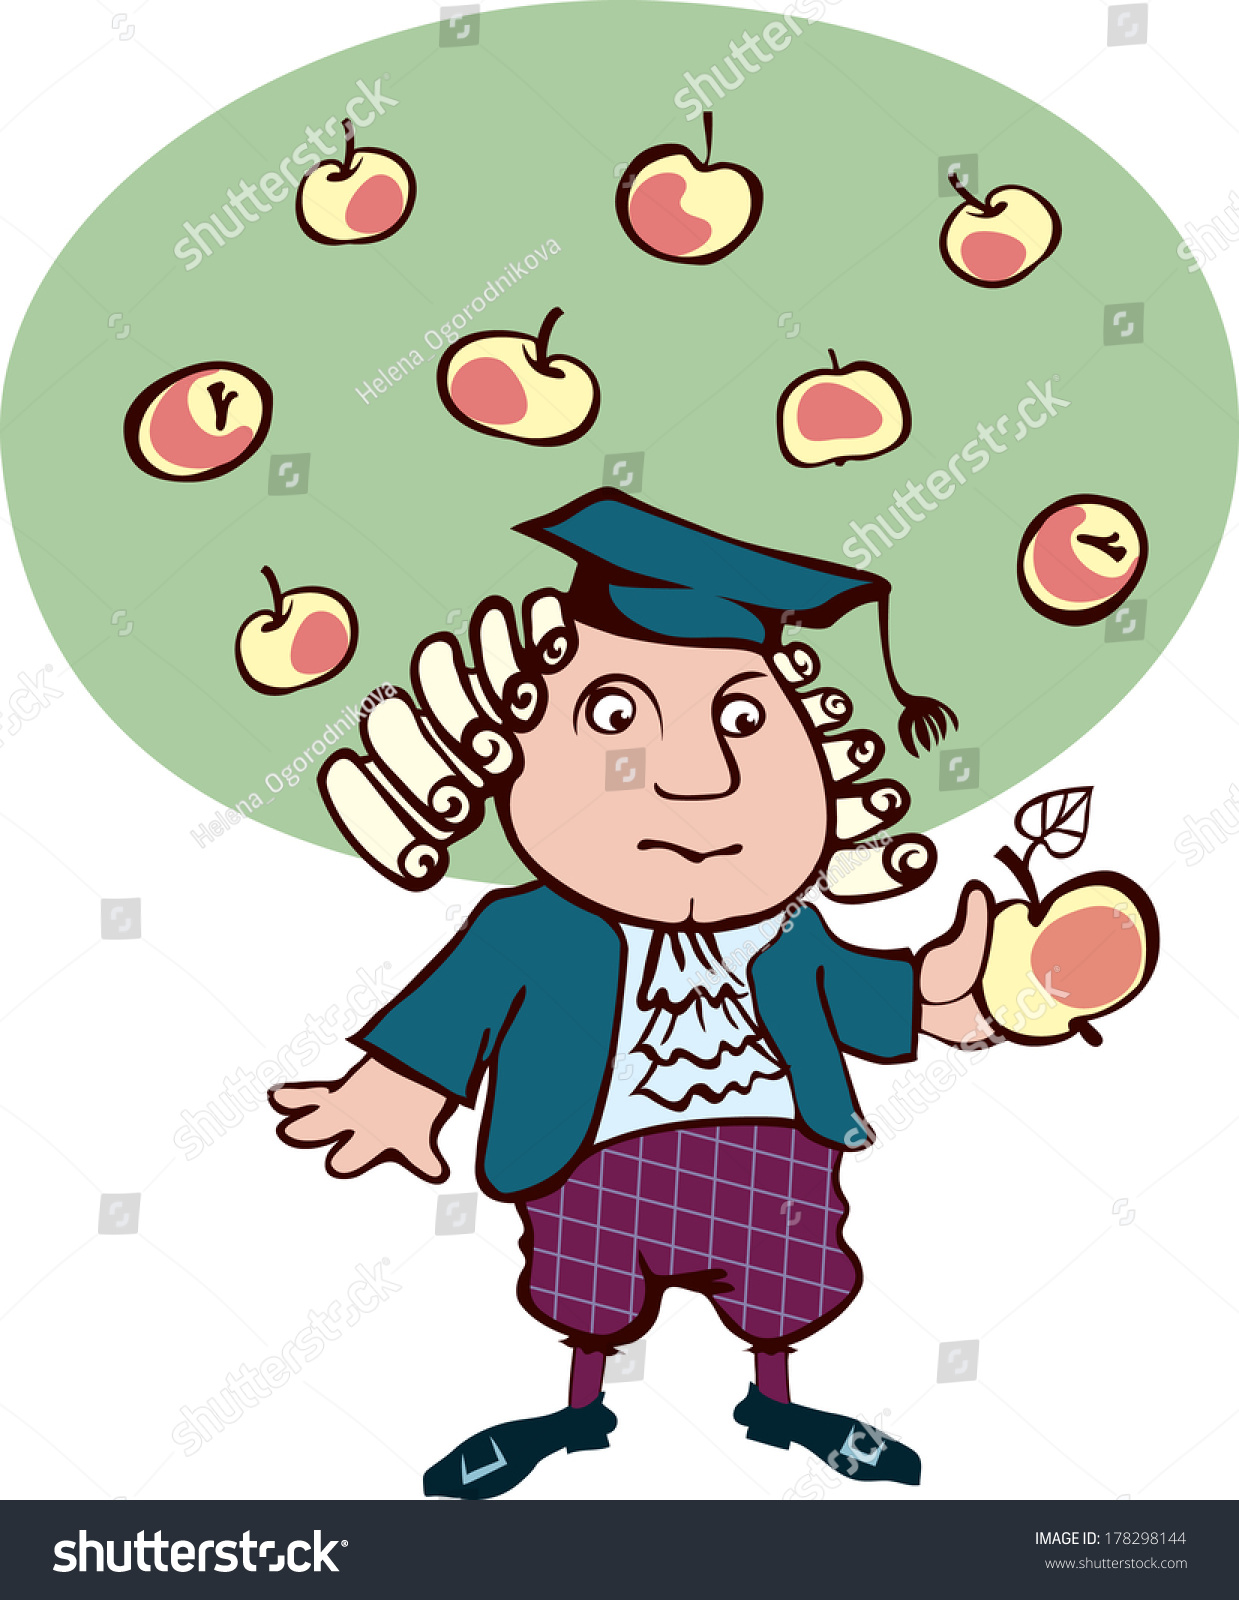 Isaac Newton Thought Looking Apple Caricature Stock Vector 178298144 ...